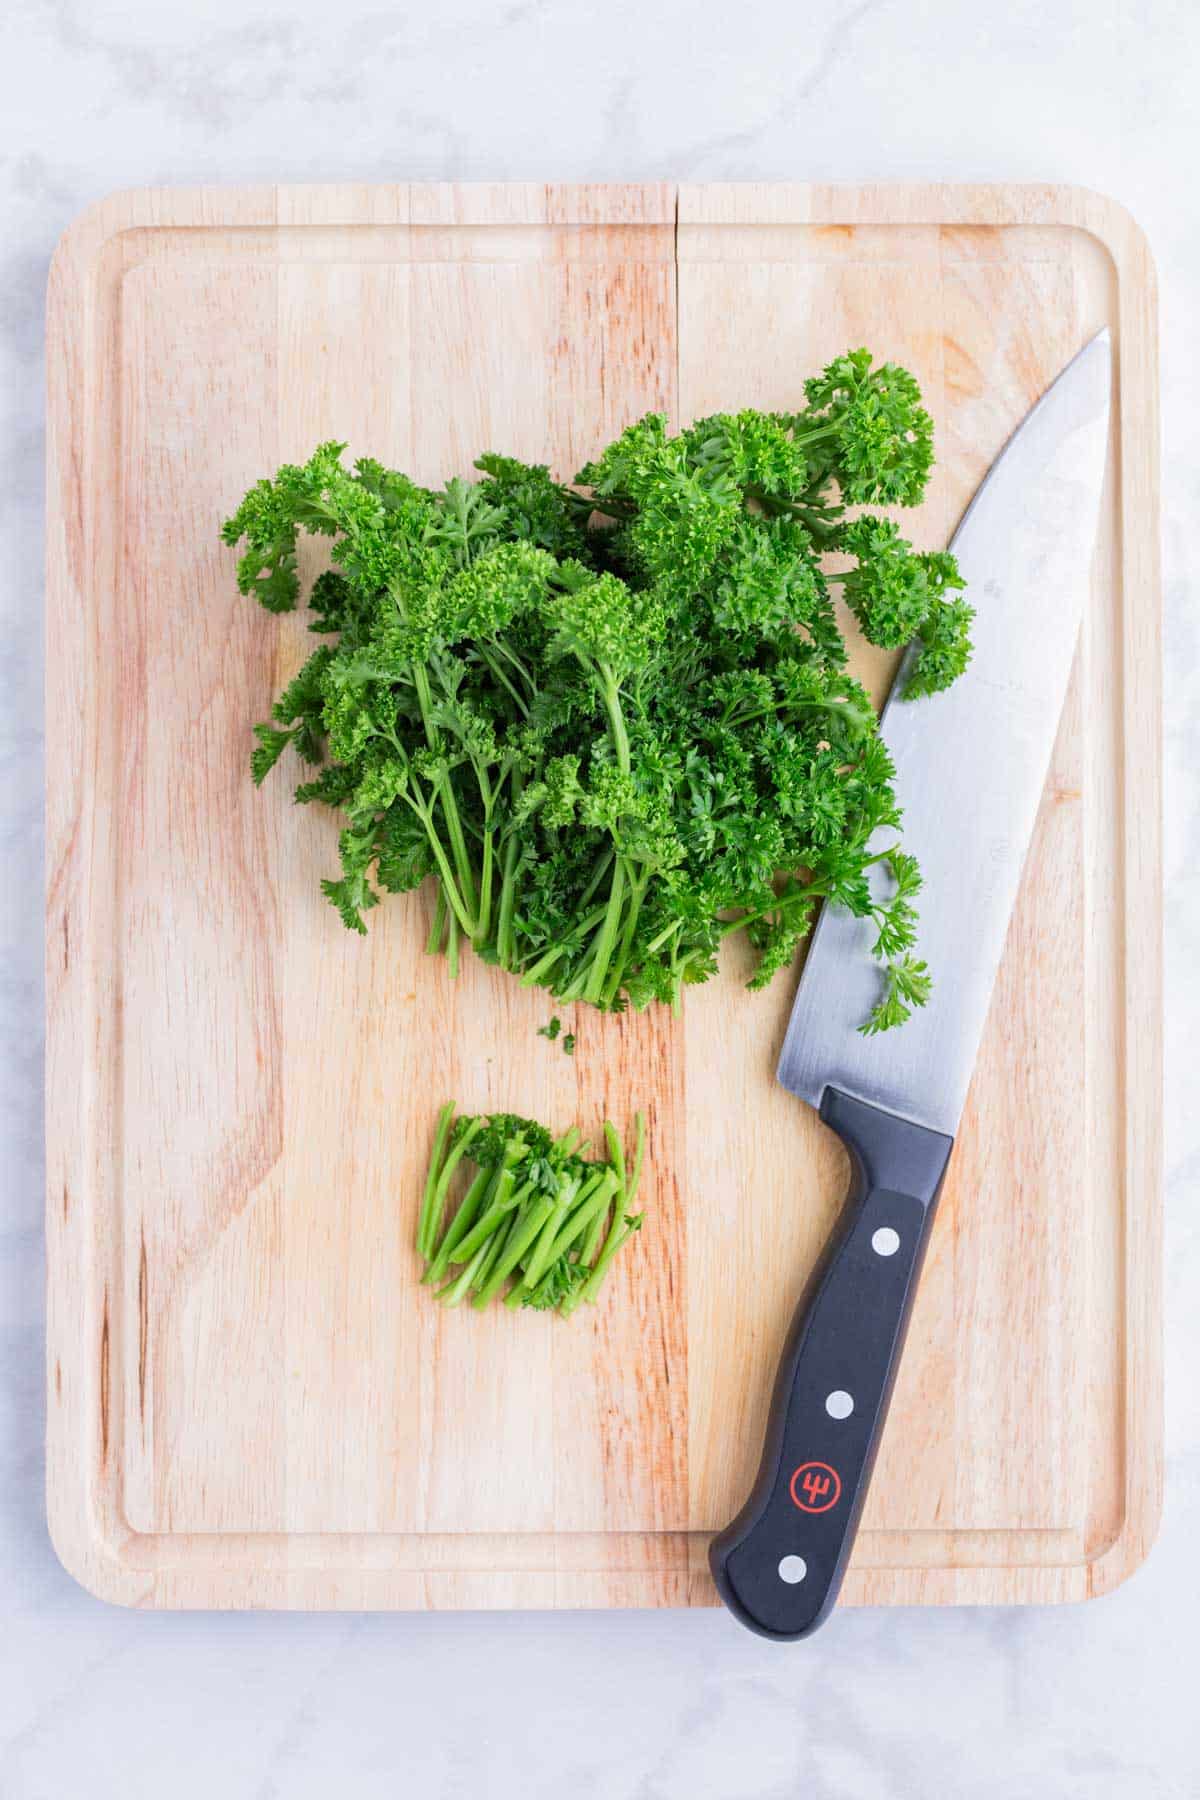 A sharp knife removes the thick stems of the parsley bunch.